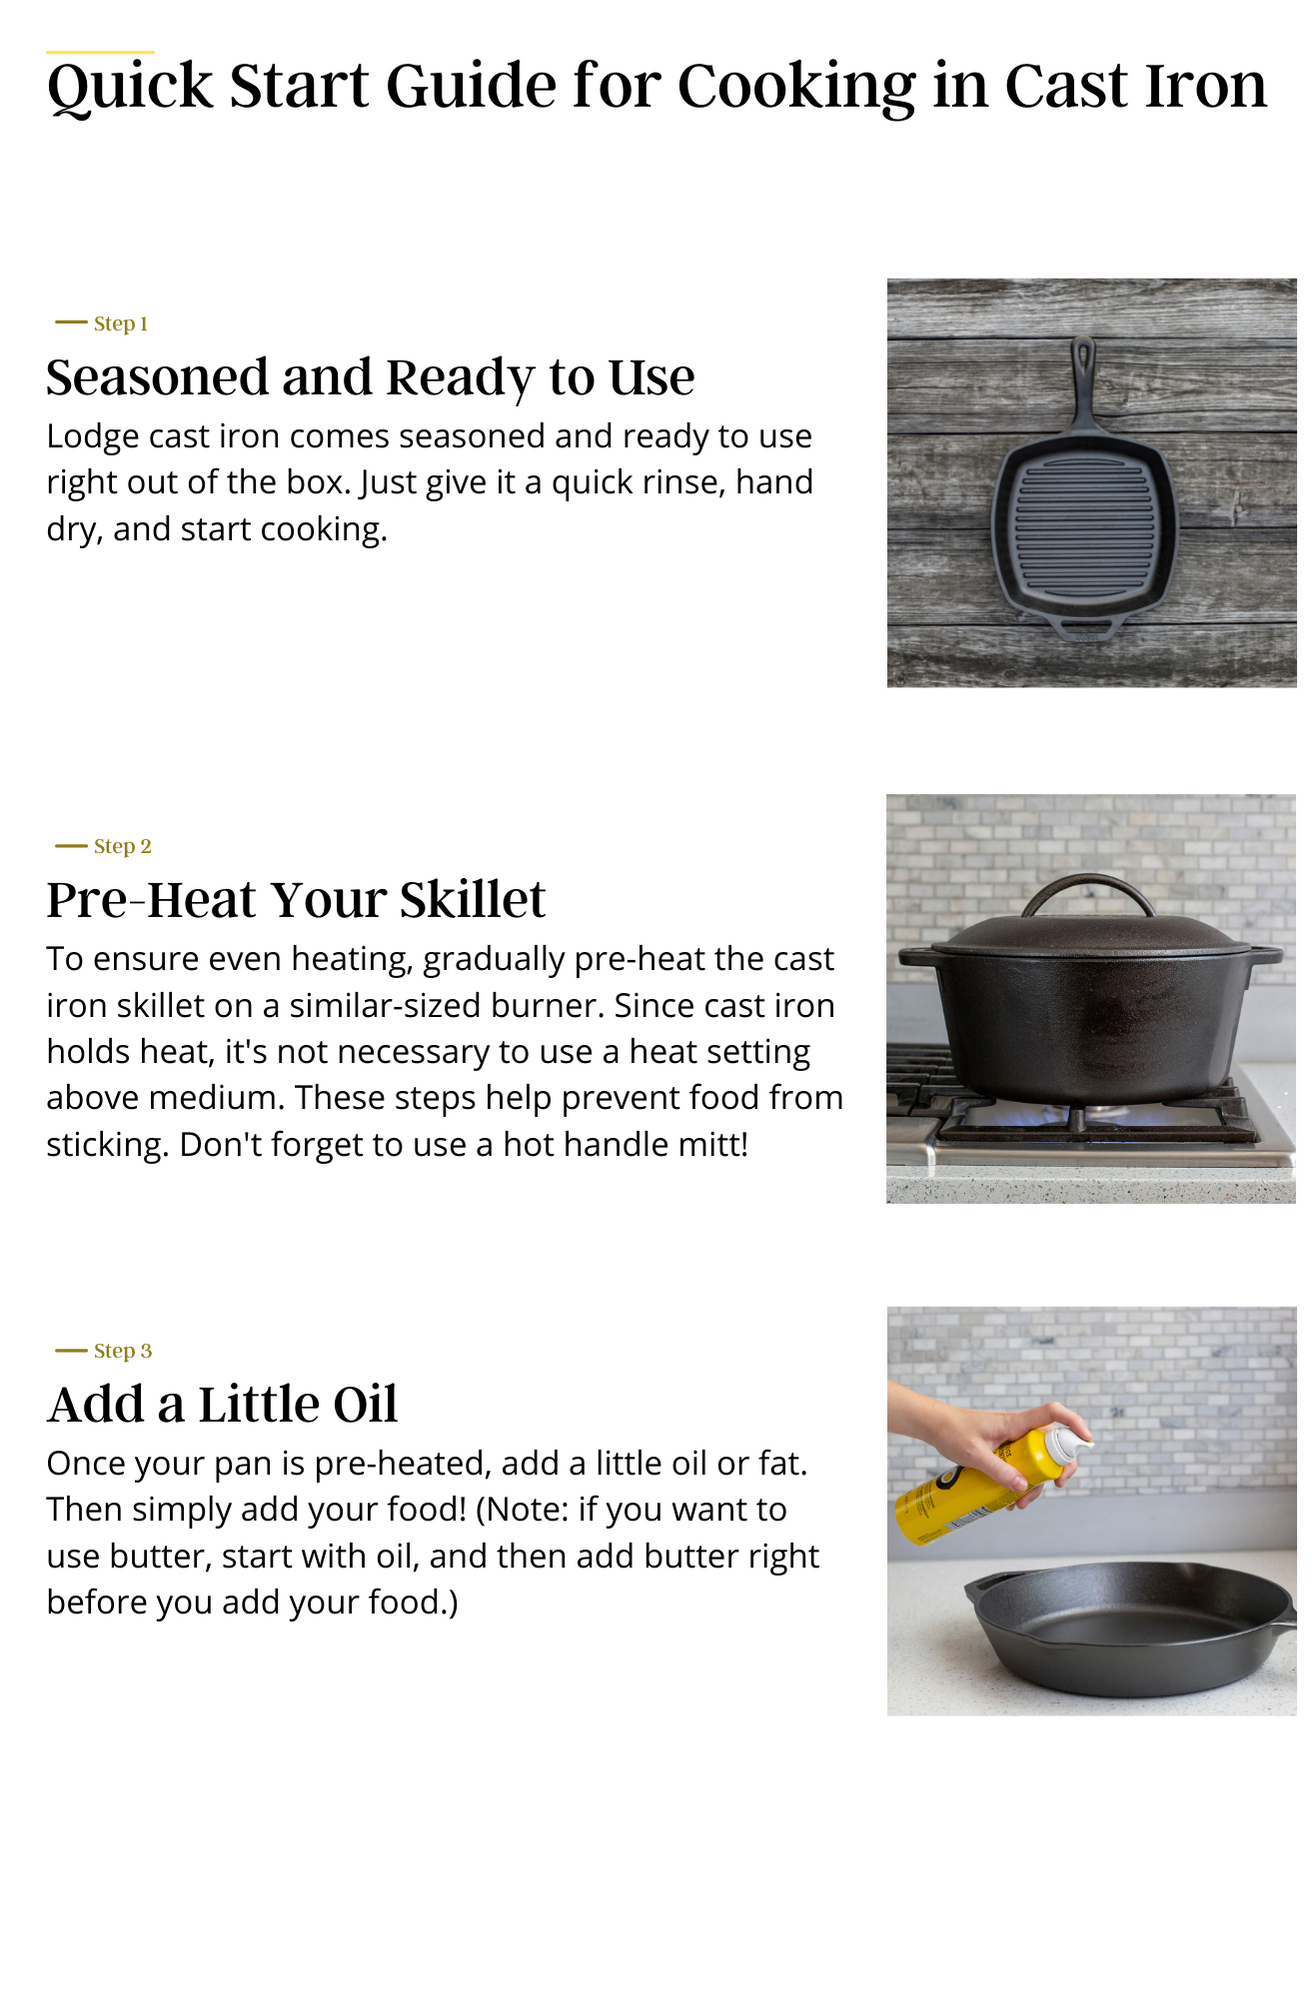 https://cdn11.bigcommerce.com/s-glcv0j2o0v/product_images/uploaded_images/quick-start-guide-for-cooking-in-cast-iron-final.png